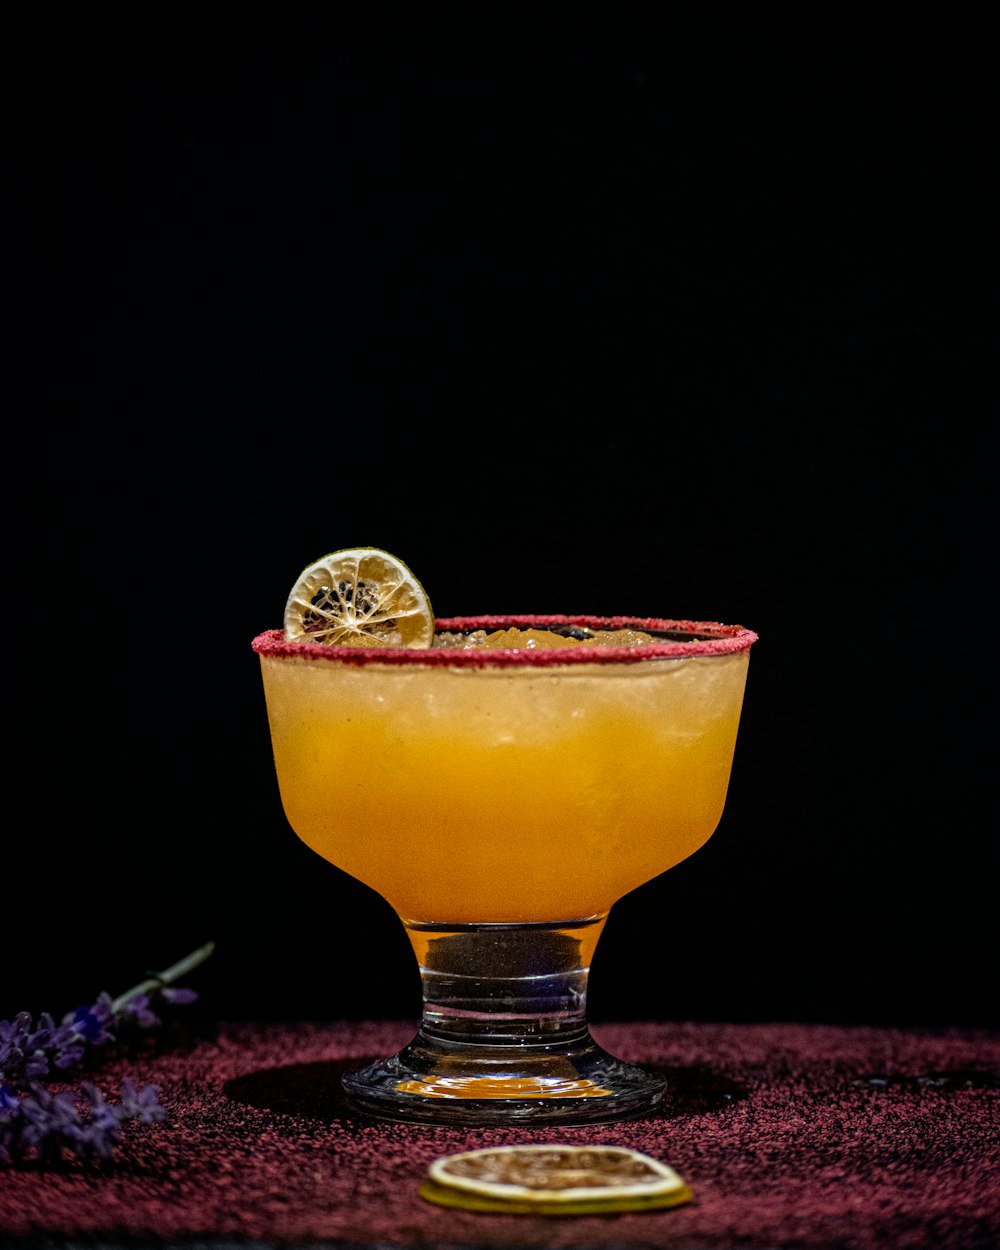 a glass of orange drink with a coin on top